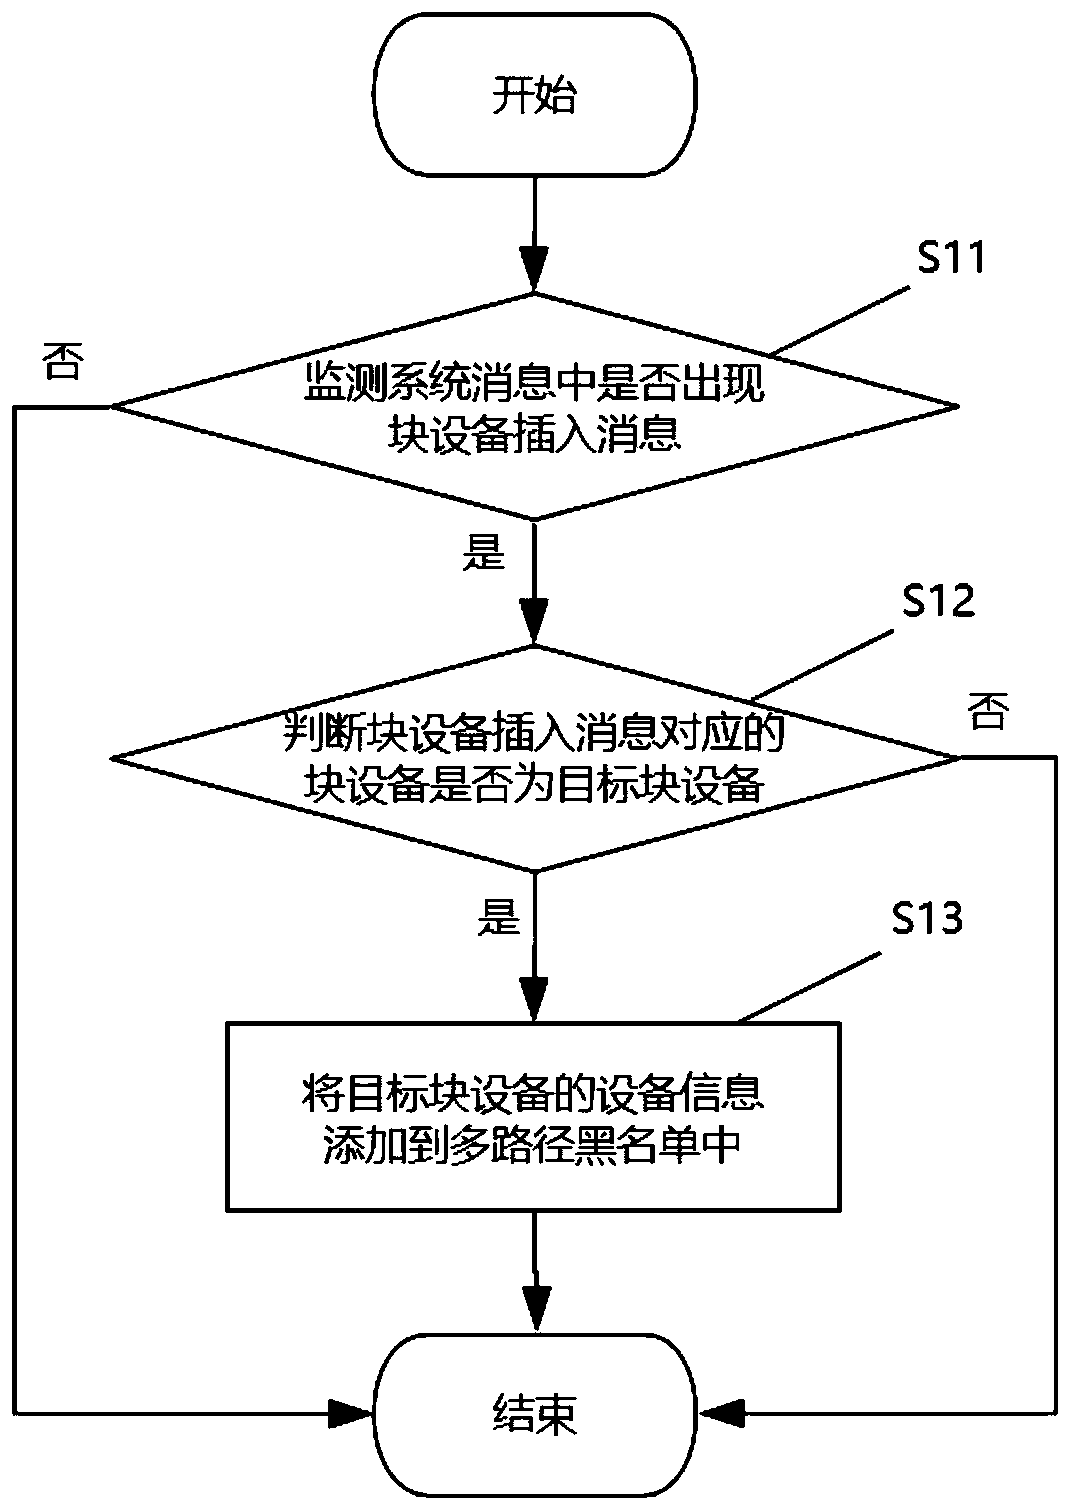 Multi-path equipment shielding system, method and equipment and readable storage medium